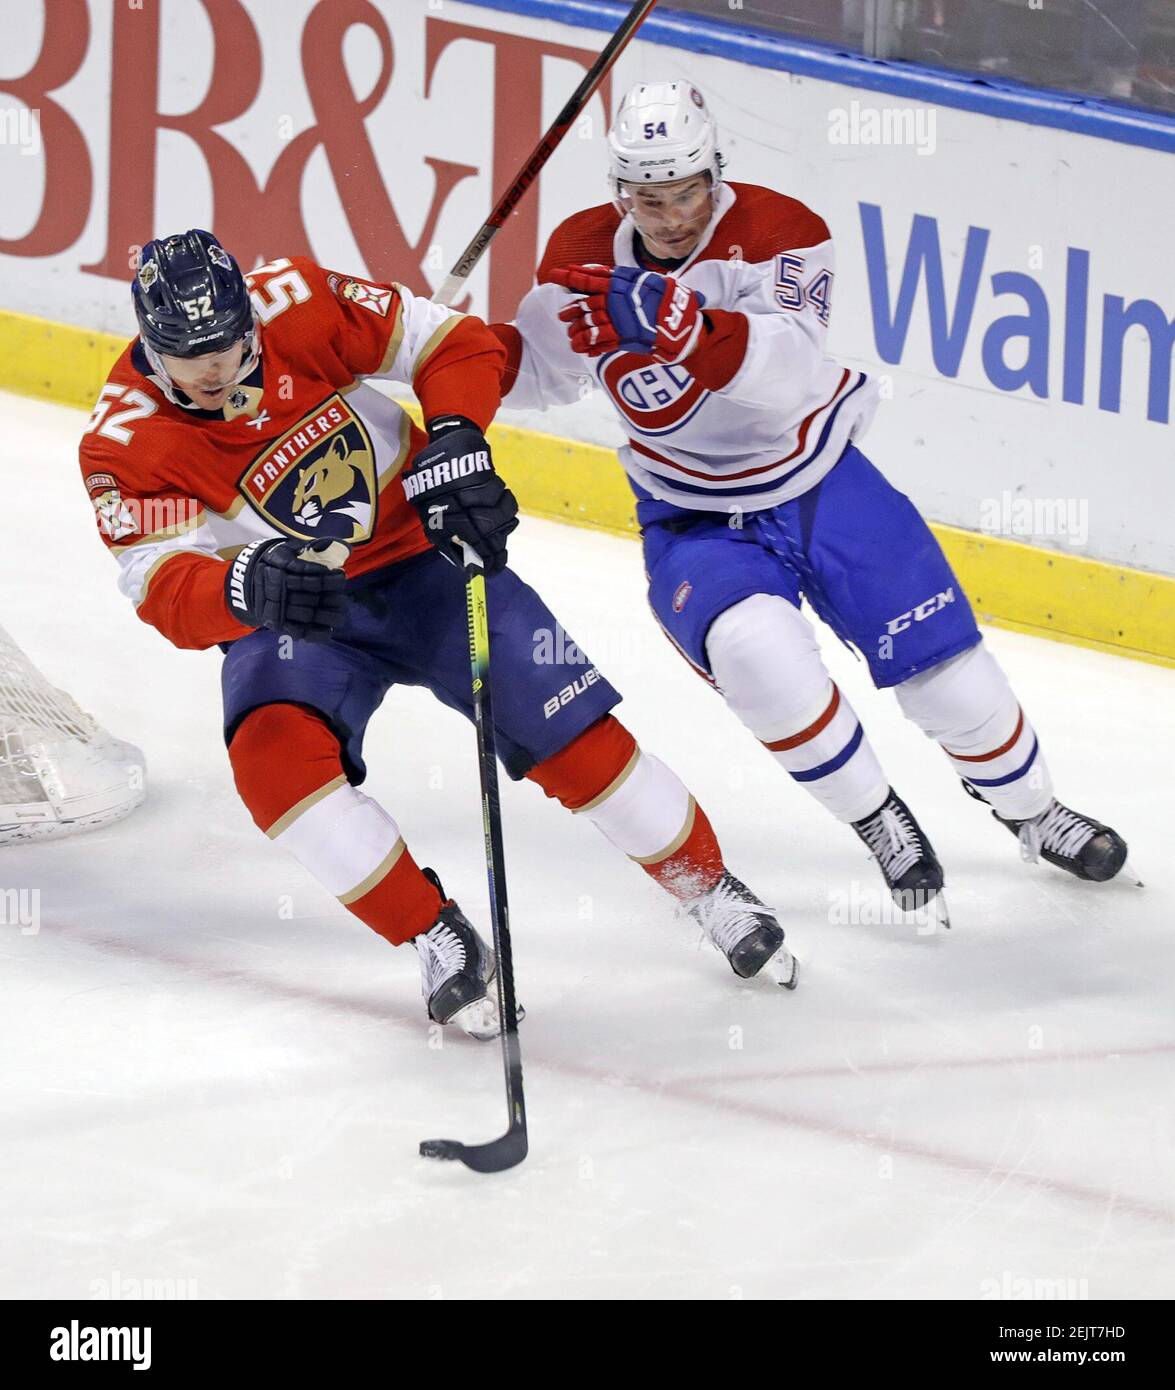 The Florida Panthers' MacKenzie Weegar (52) hits the puck as the Montreal Canadiens' Charles Hudon pursues in the first period at the BB&T Center in Sunrise, Fla., on Saturday, March 7, 2020. The Panthers won, 4-1. (Al Diaz/Miami Herald/TNS) Stock Photo